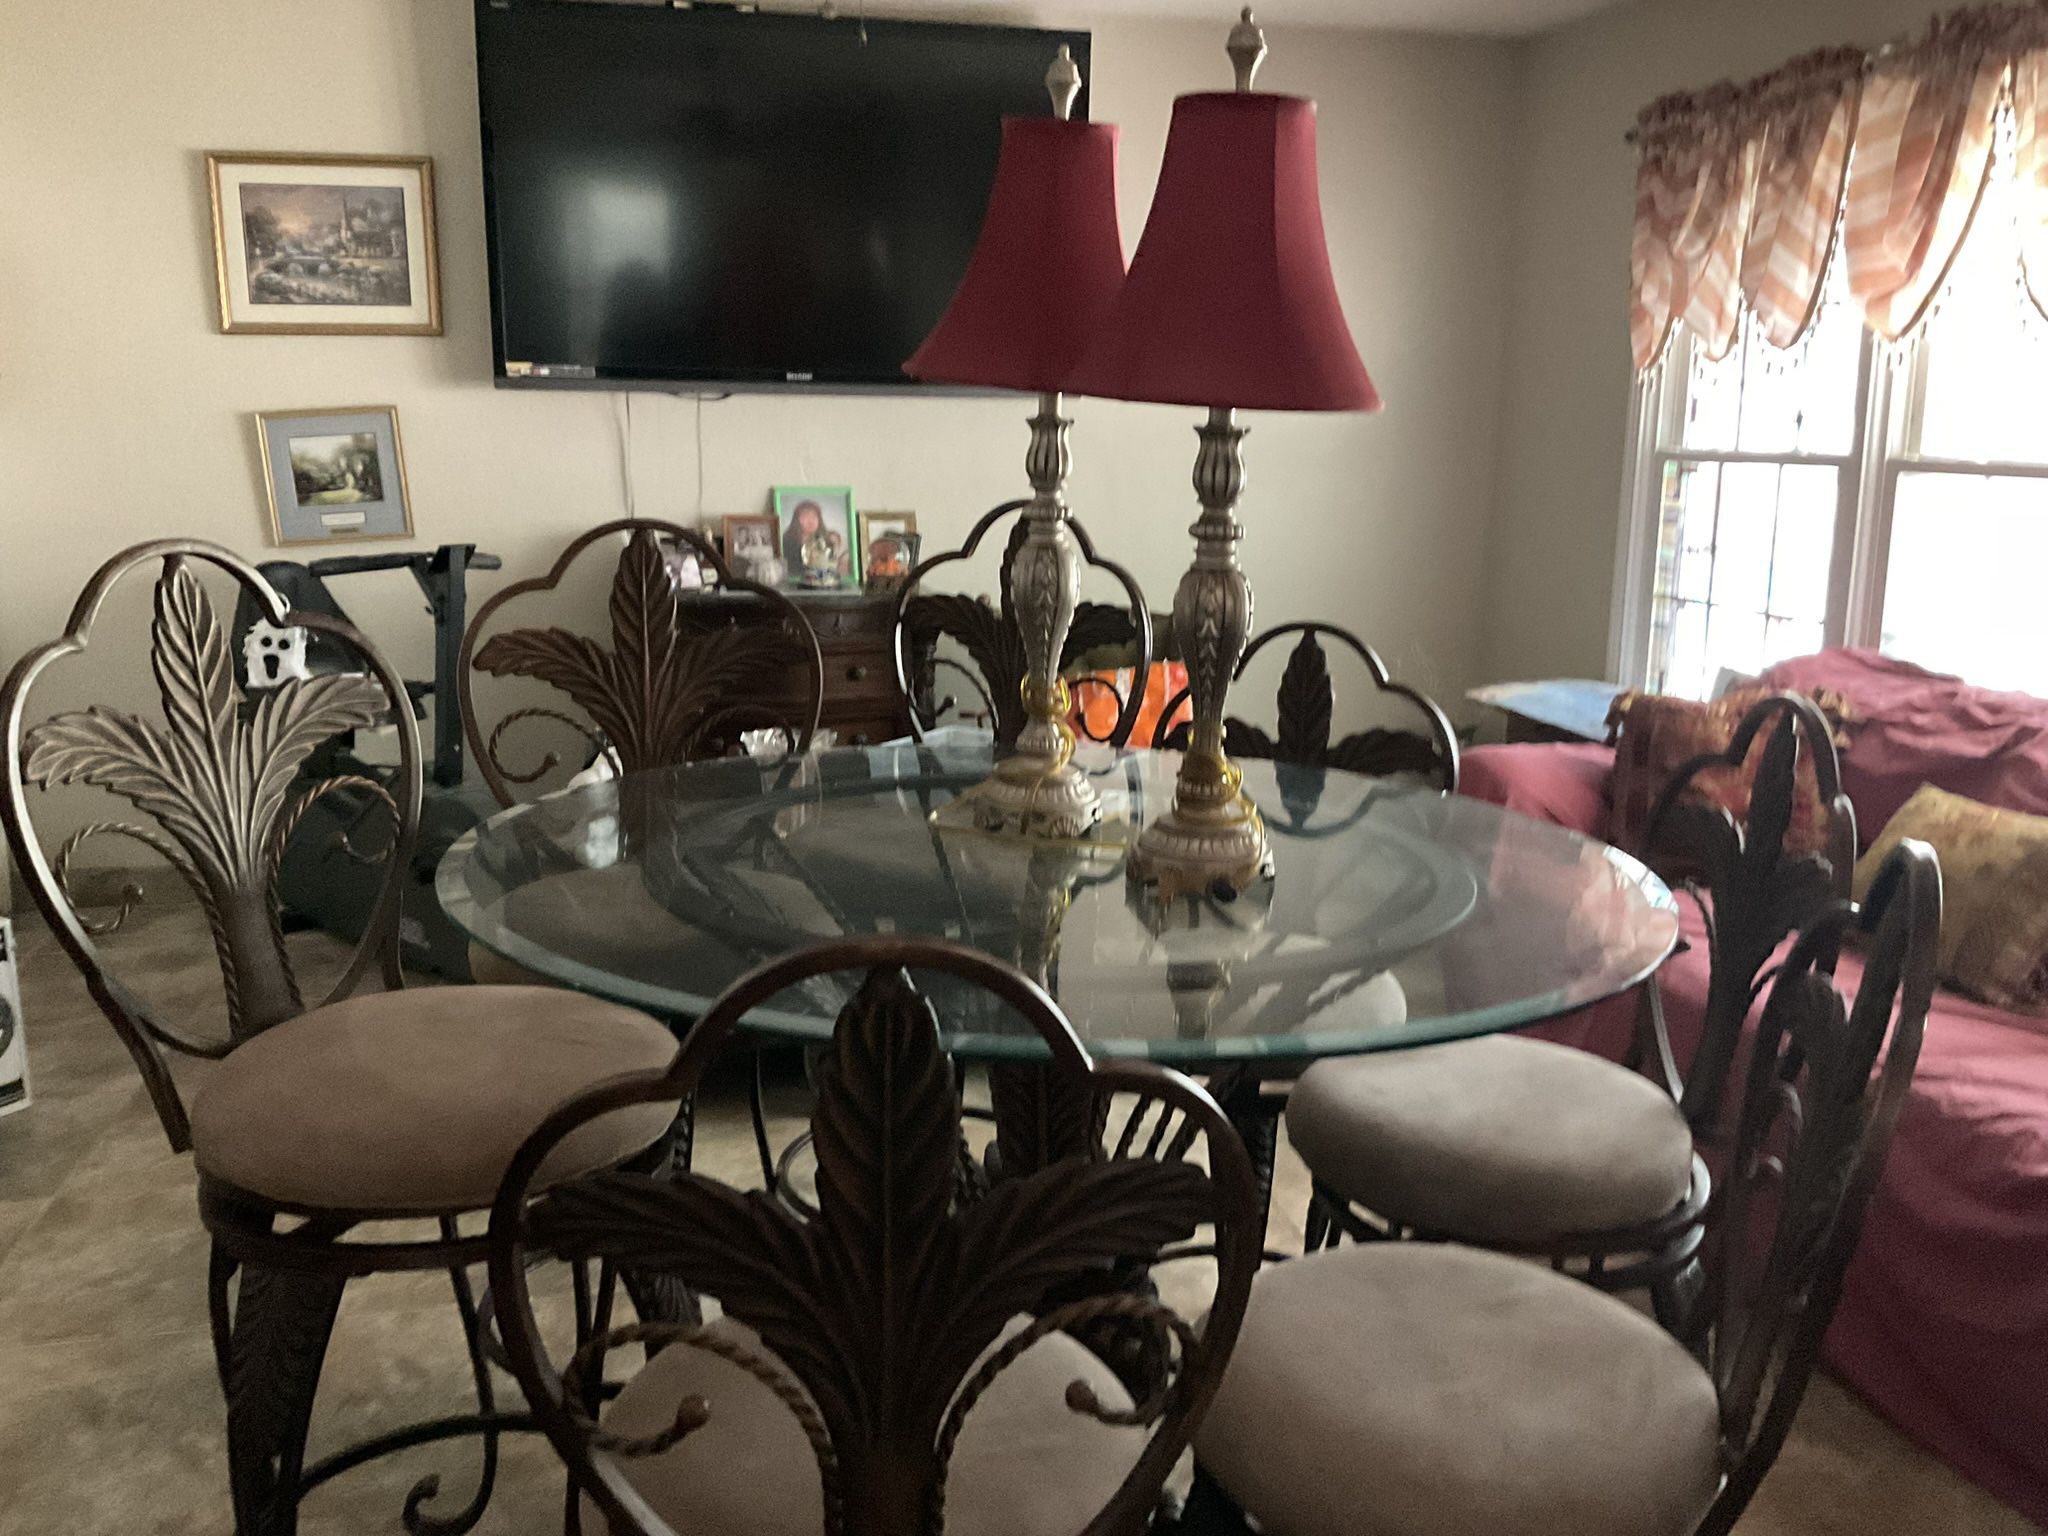 Glass Table Metal Chairs Package Deal All For $650.00